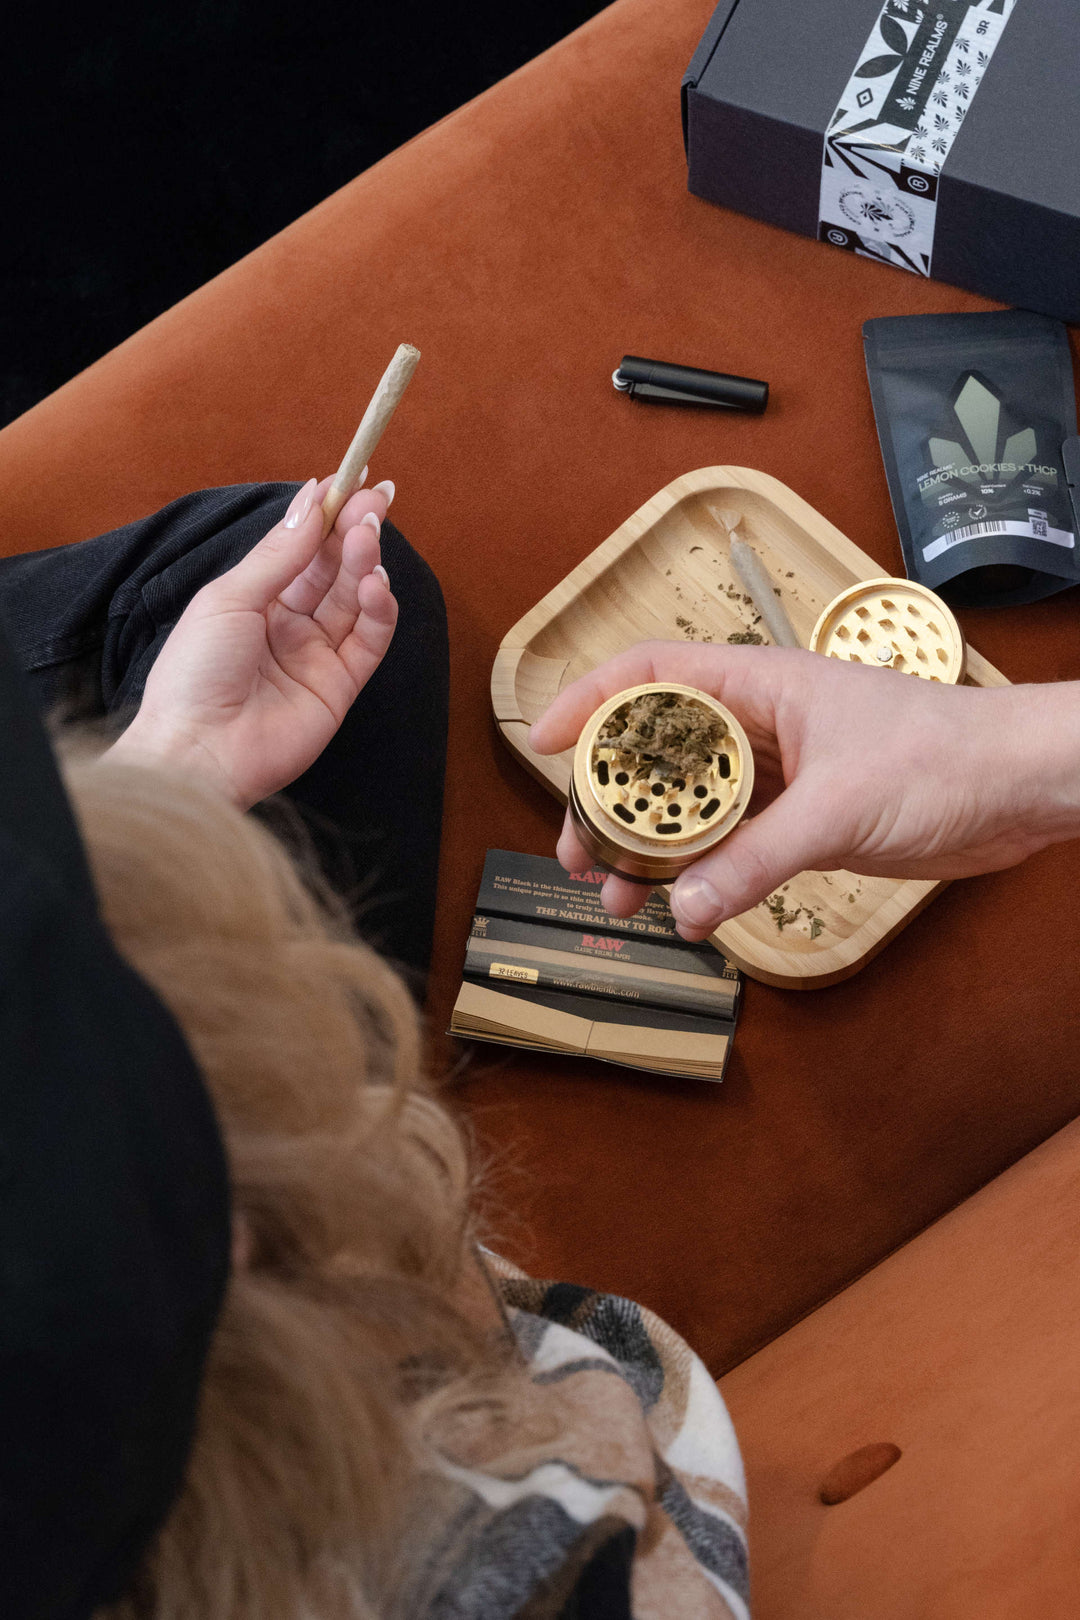 Female holding weed pre-rolled joint with cannabis flower buds in the grinder and tray